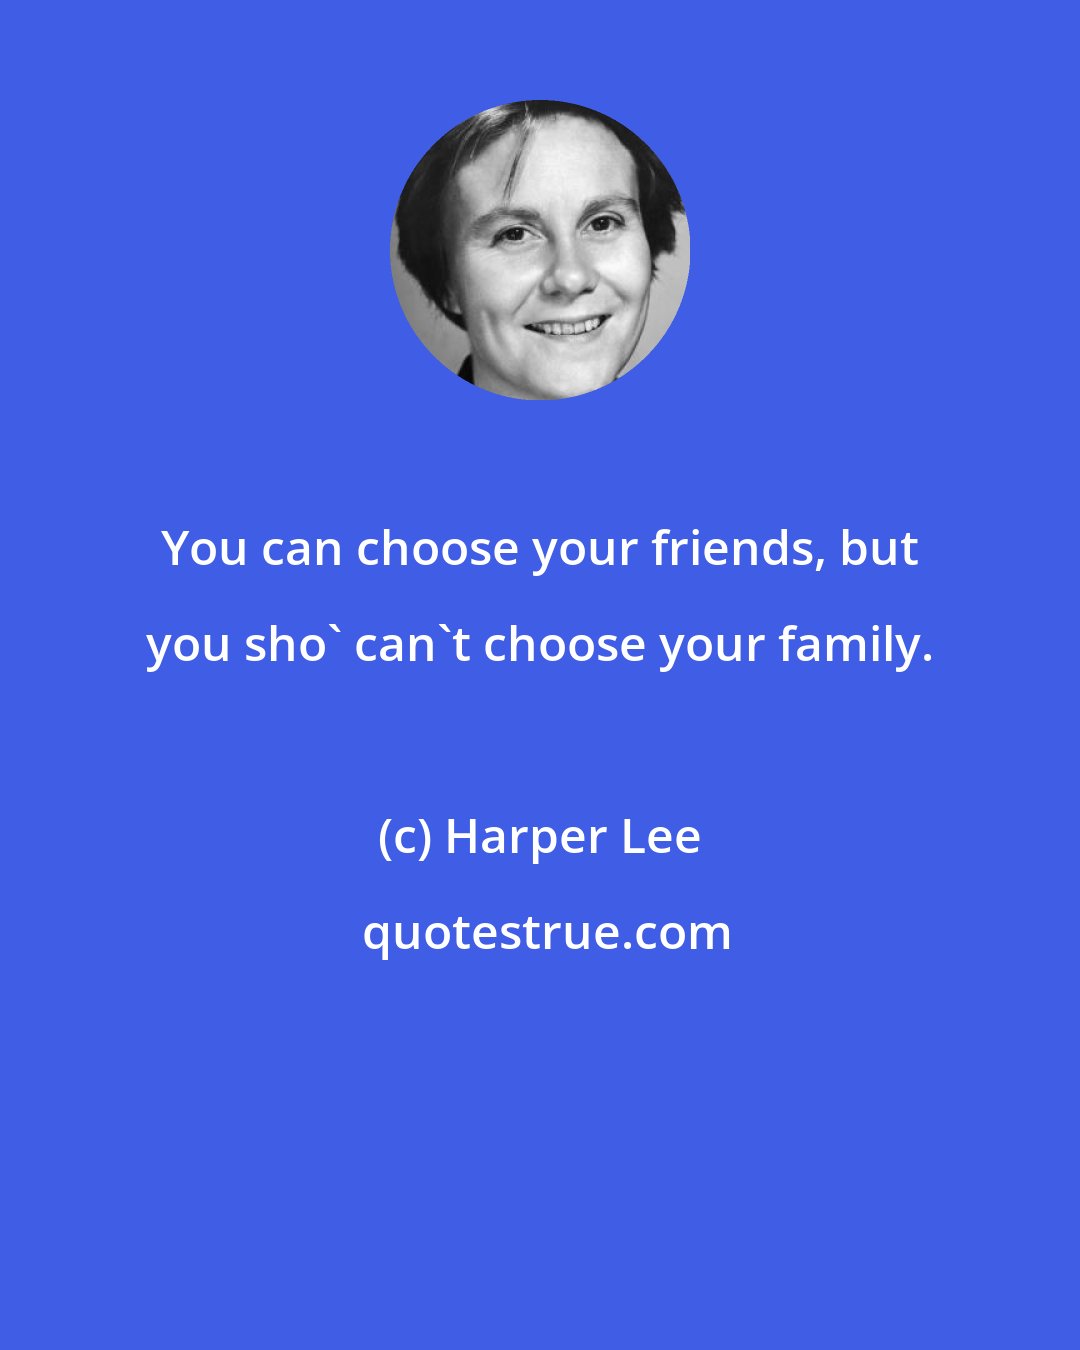 Harper Lee: You can choose your friends, but you sho' can't choose your family.